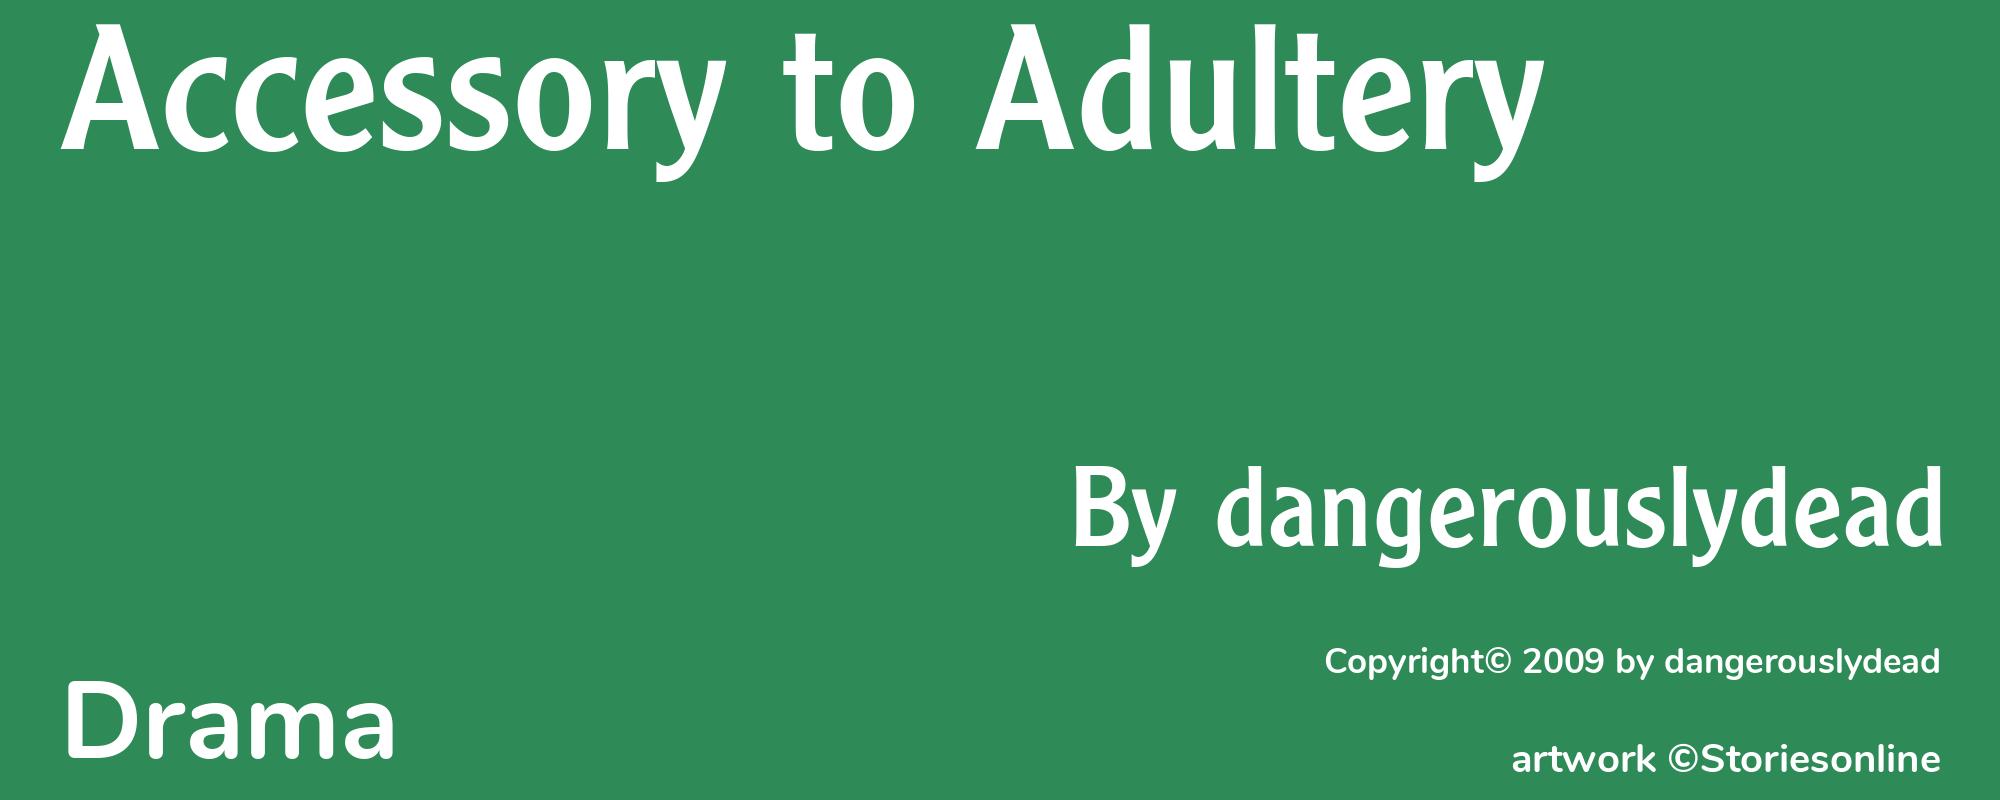 Accessory to Adultery - Cover